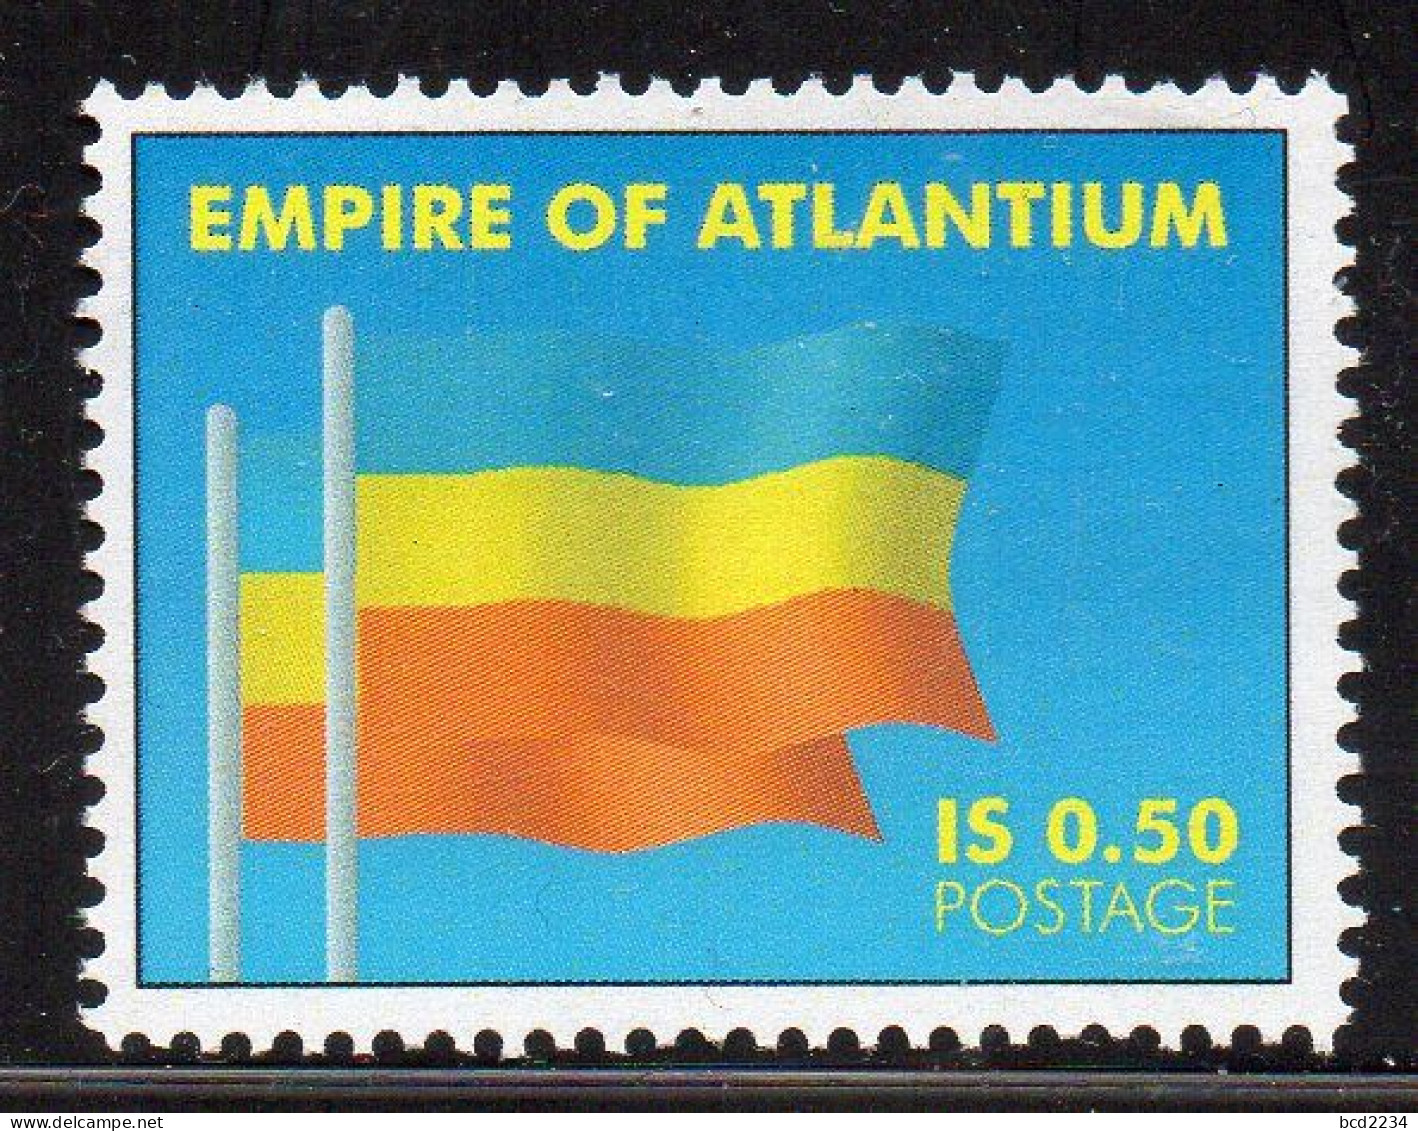 EMPIRE OF ATLANTIUM 2006 RARE NHM ONLY 3000 STAMPS ISSUED MICRONATION NEW SOUTH WALES AUSTRALIA INDEPENDENT NATION FLAG - Vignettes De Fantaisie